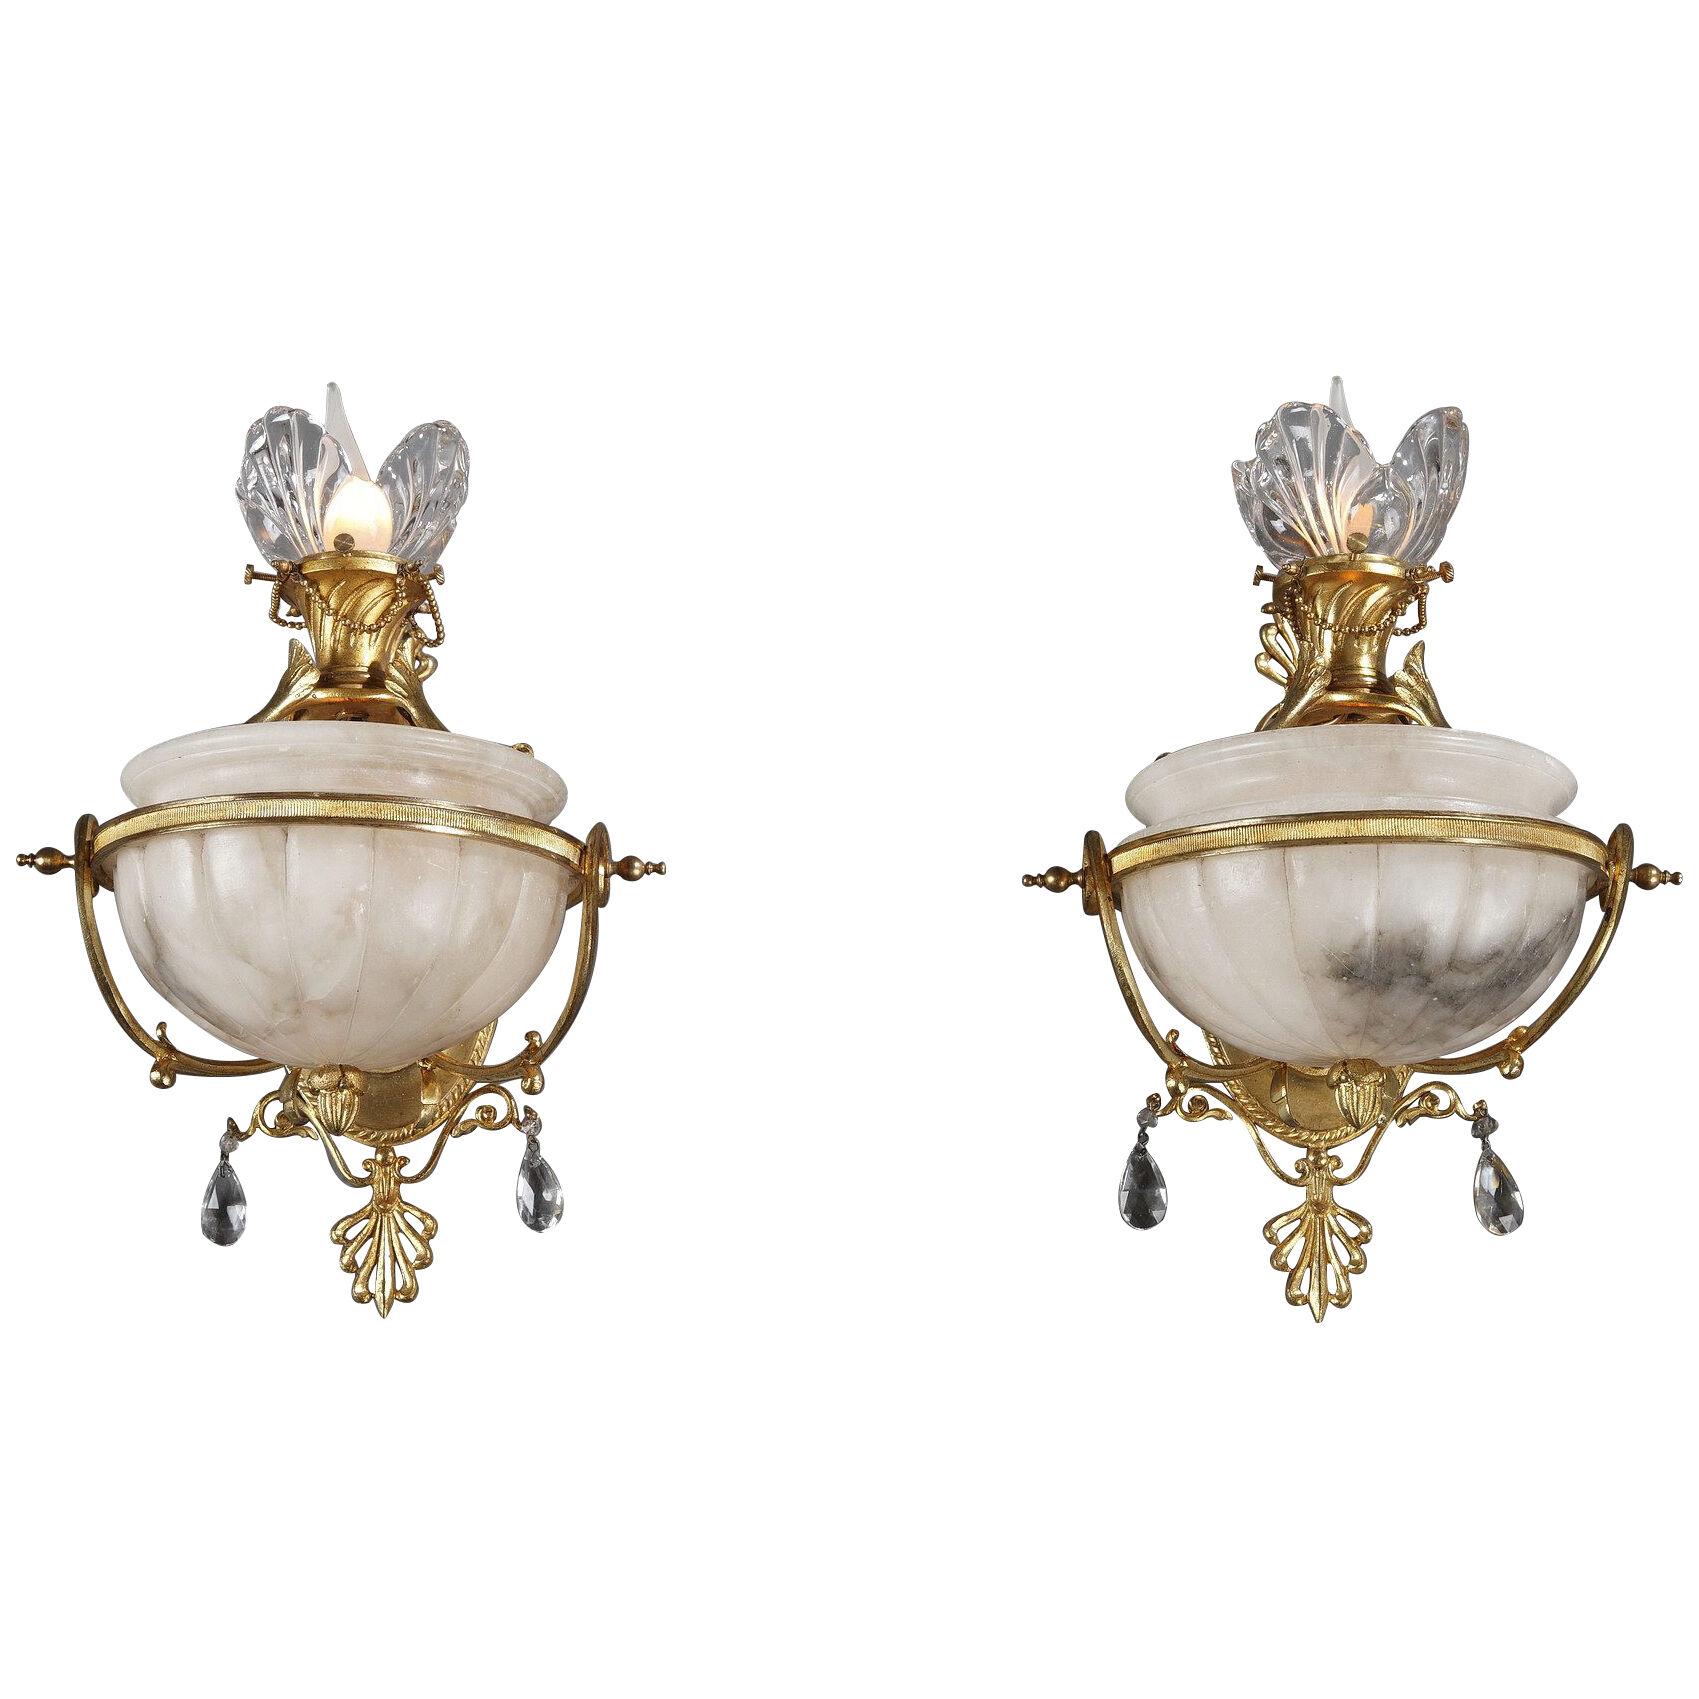 Charming Pair of Wall-Lights Attributed to Delisle, France, Circa 1900